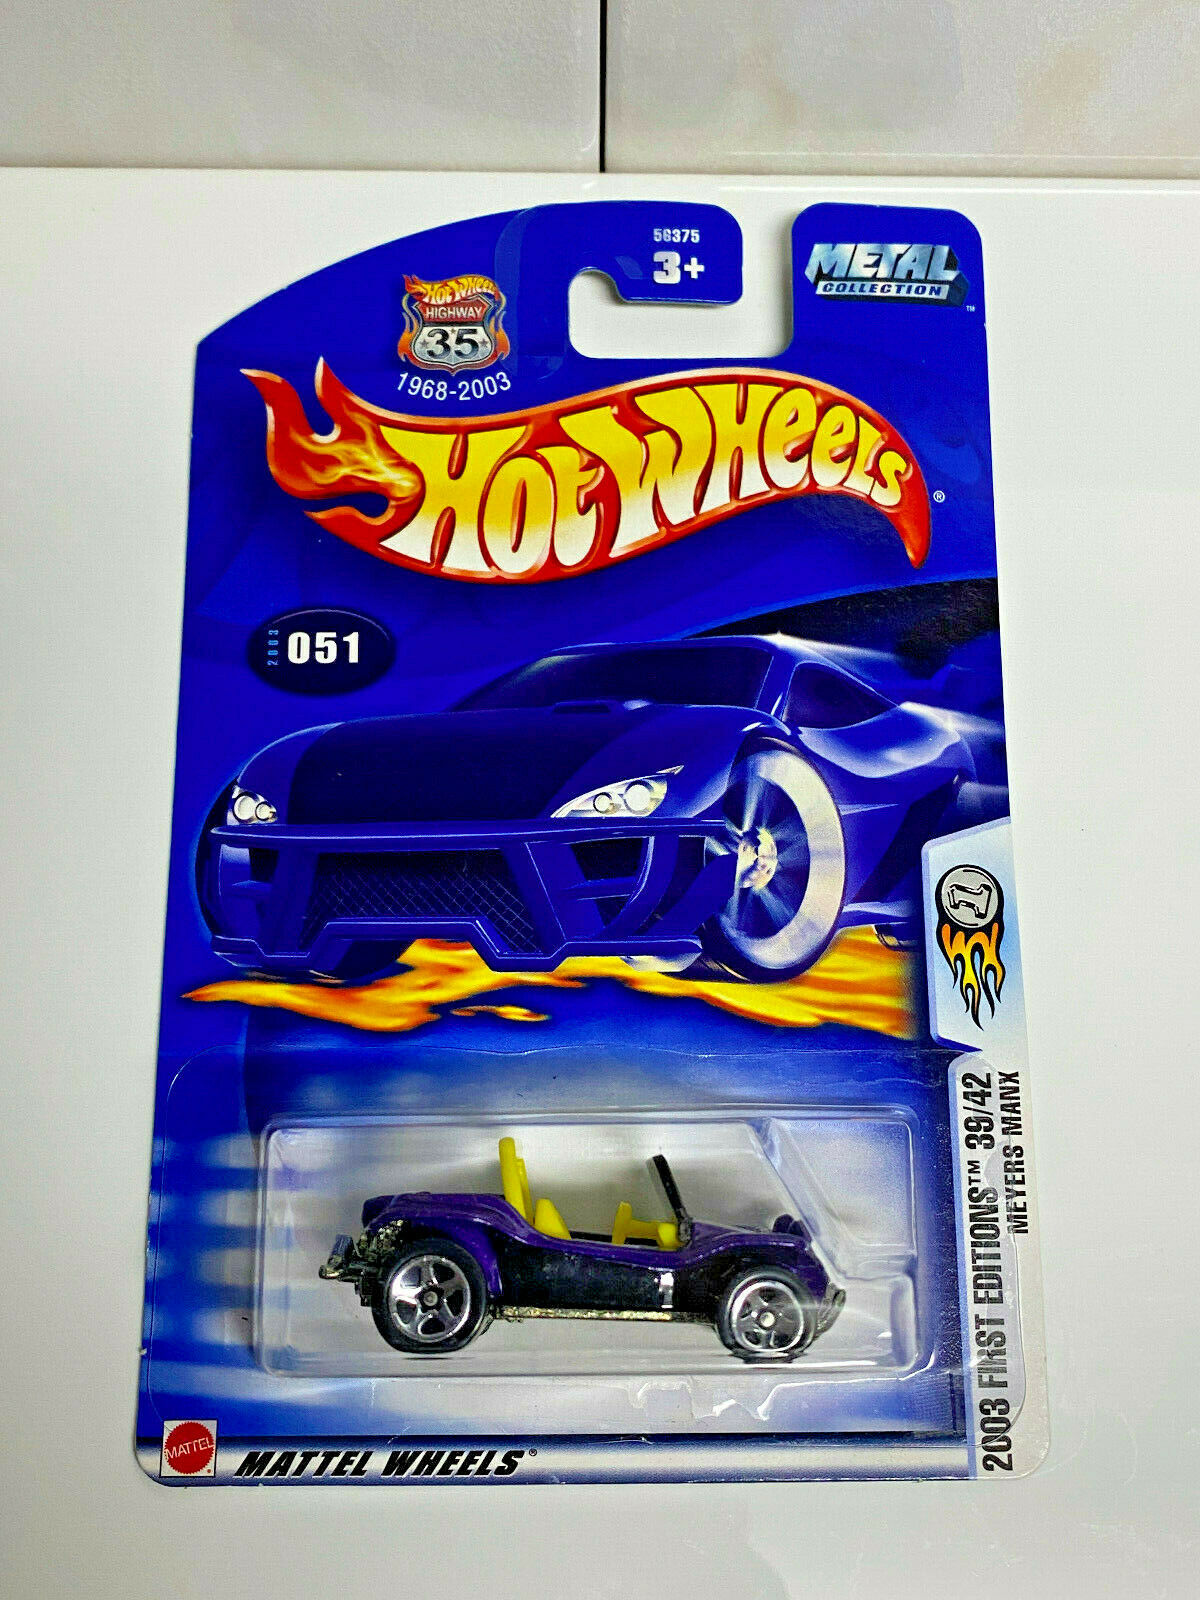 2003 Hot Wheels 2003 First Editions 39/42 Meyers Manx Collector #051 NIP